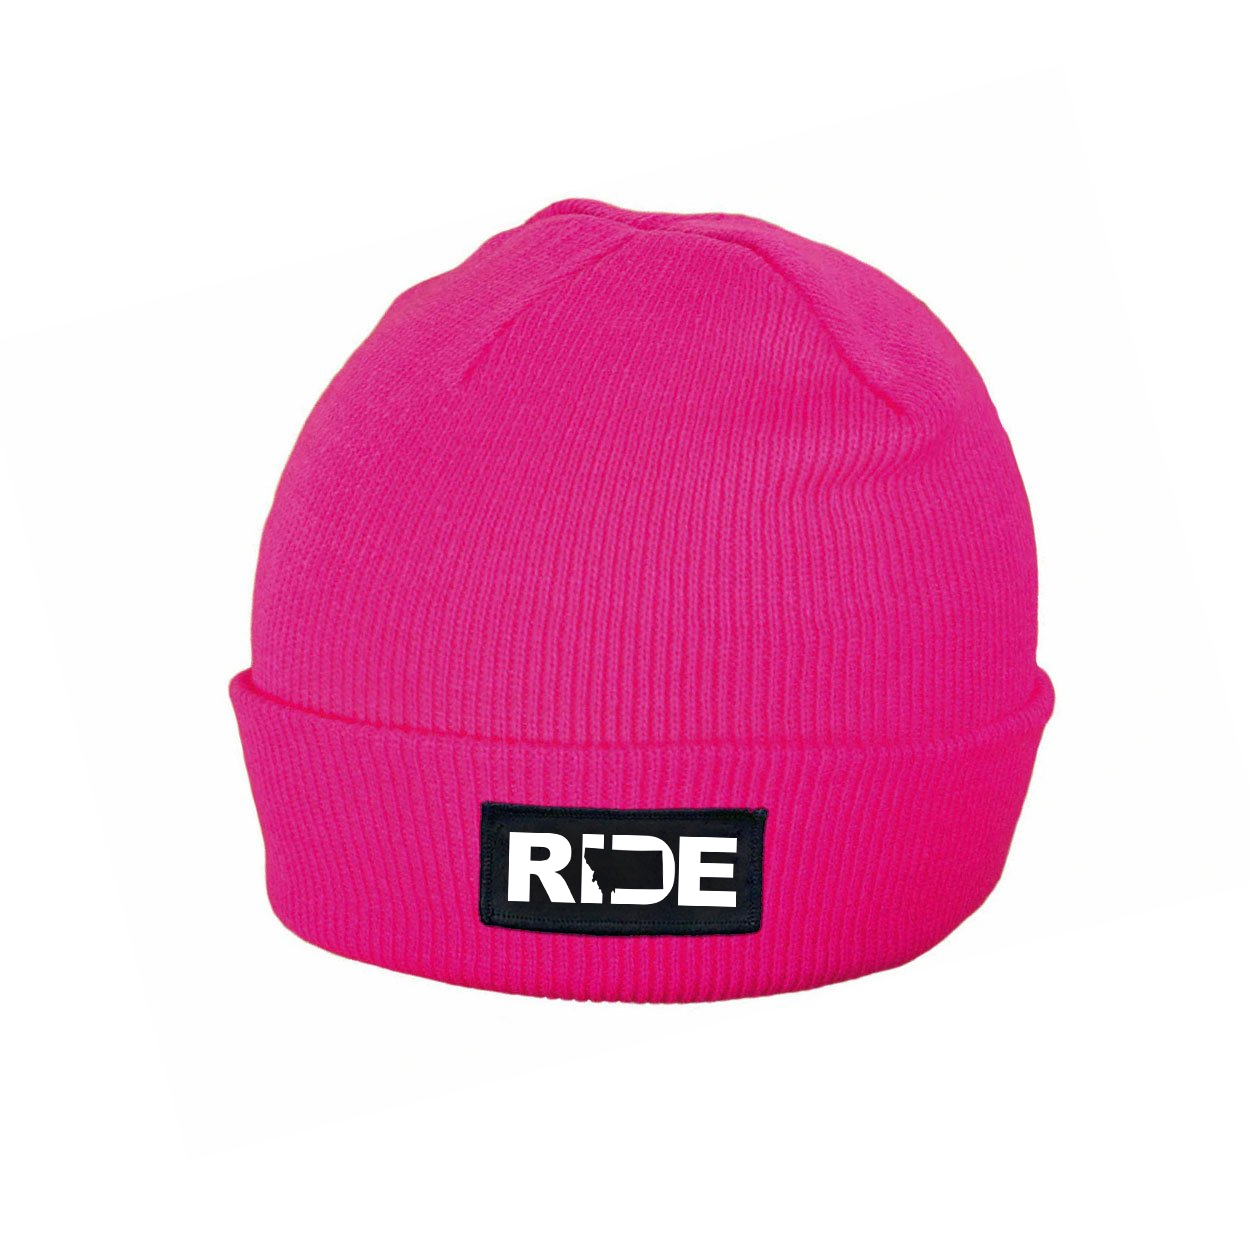 Ride Montana Night Out Woven Patch Roll Up Skully Beanie Heather Fuchsia (White Logo)